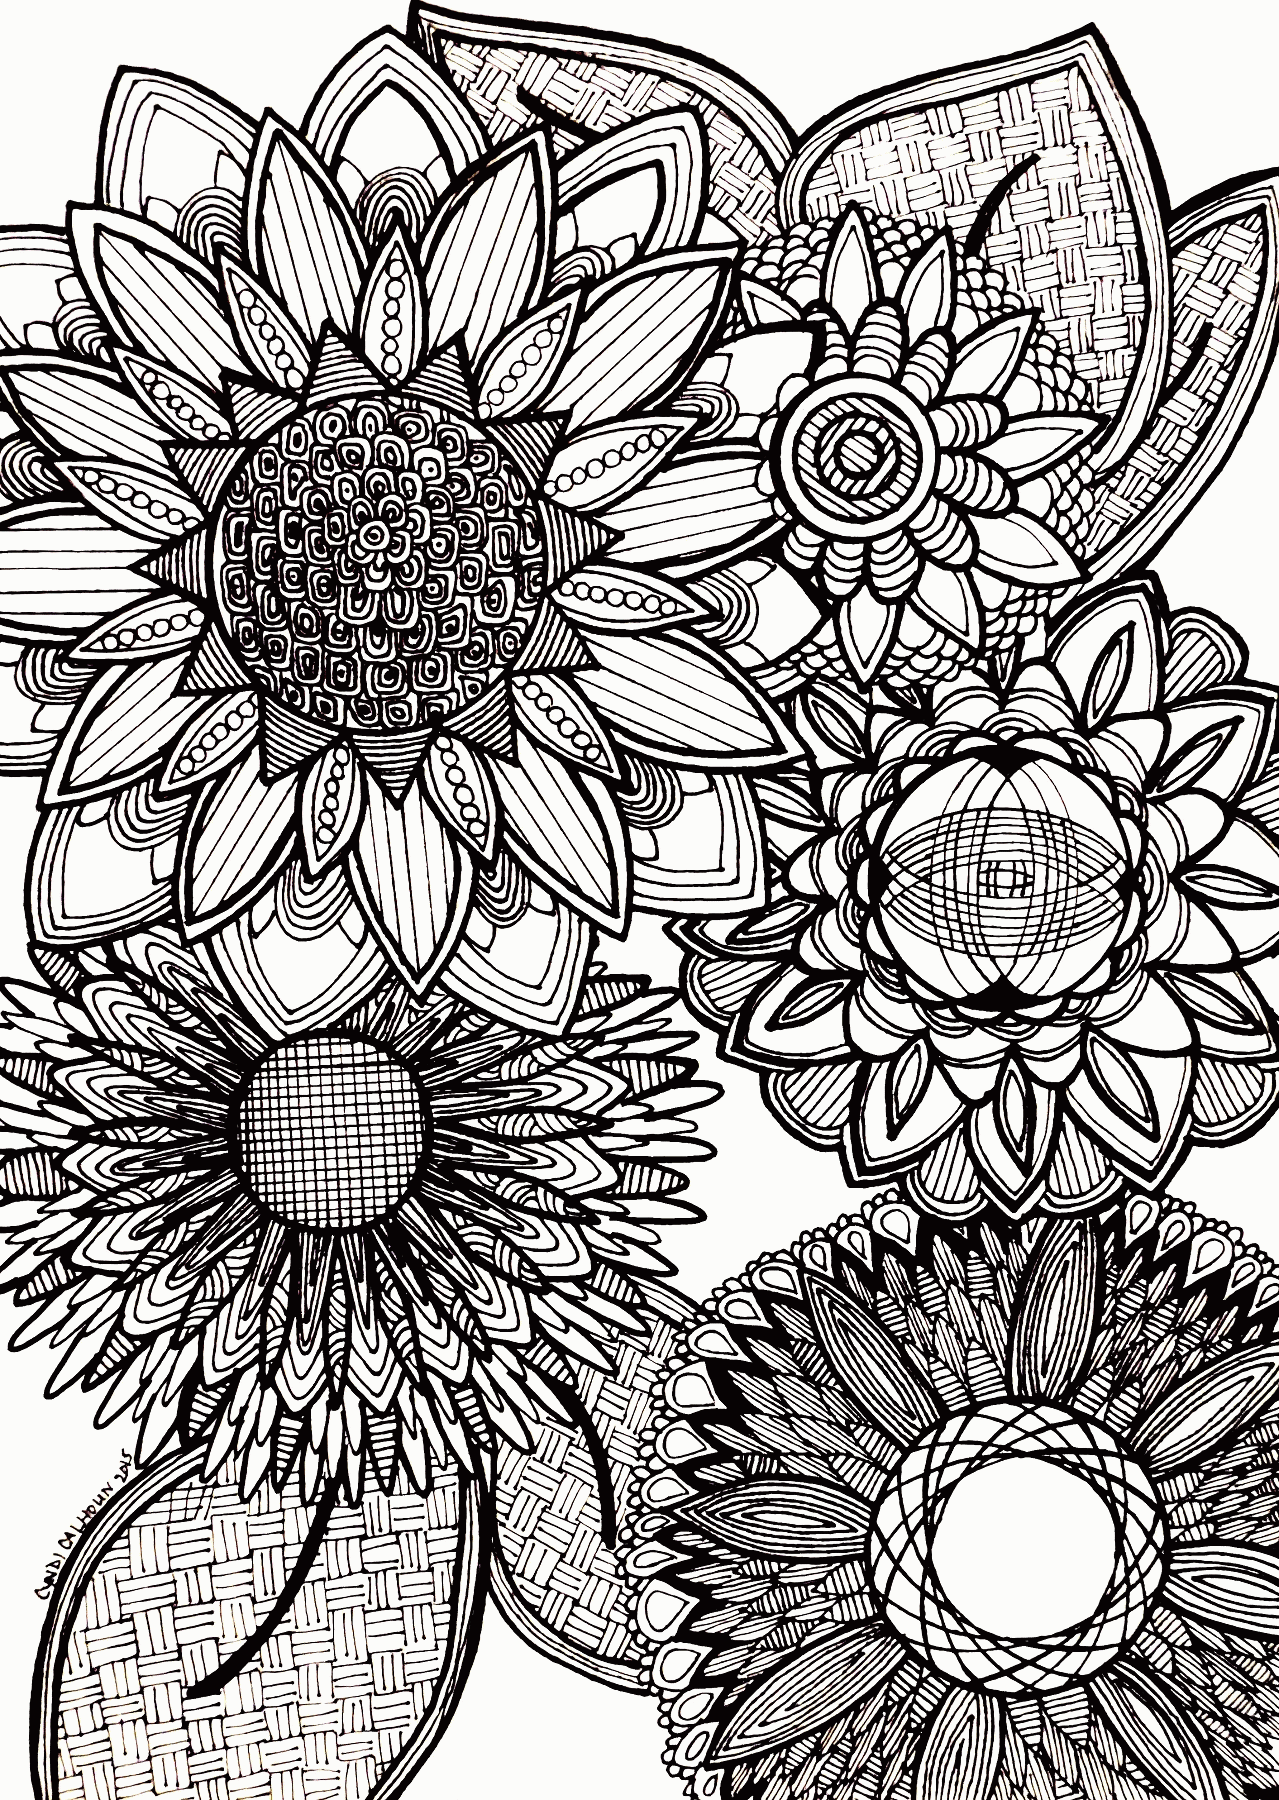 Abstract Flowers Coloring Page – Contemplative Coloring